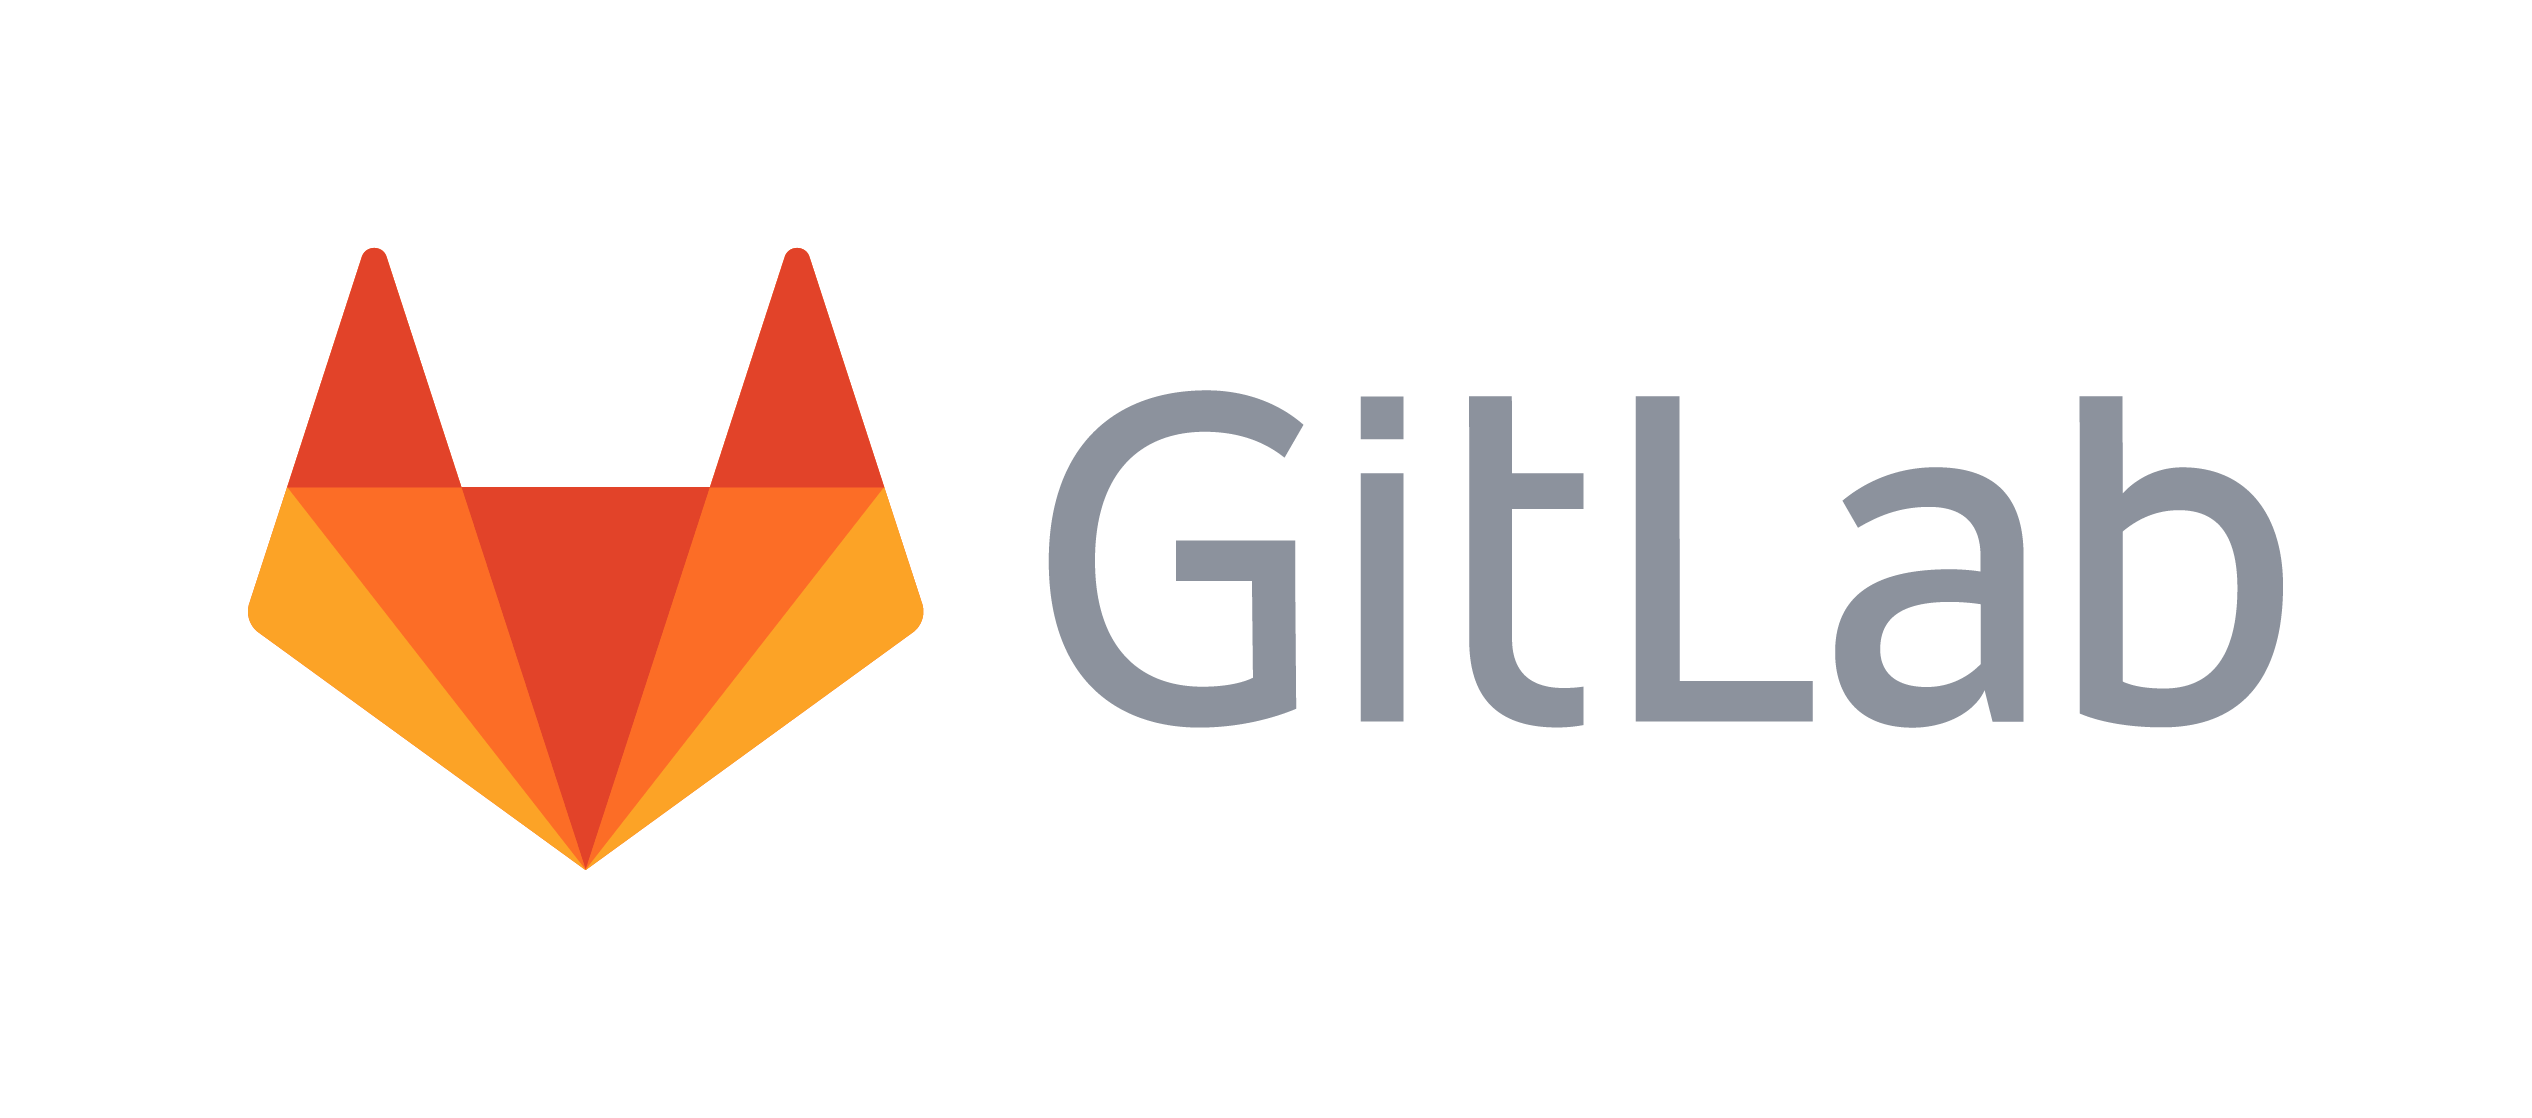 Hosted and built by GitLab